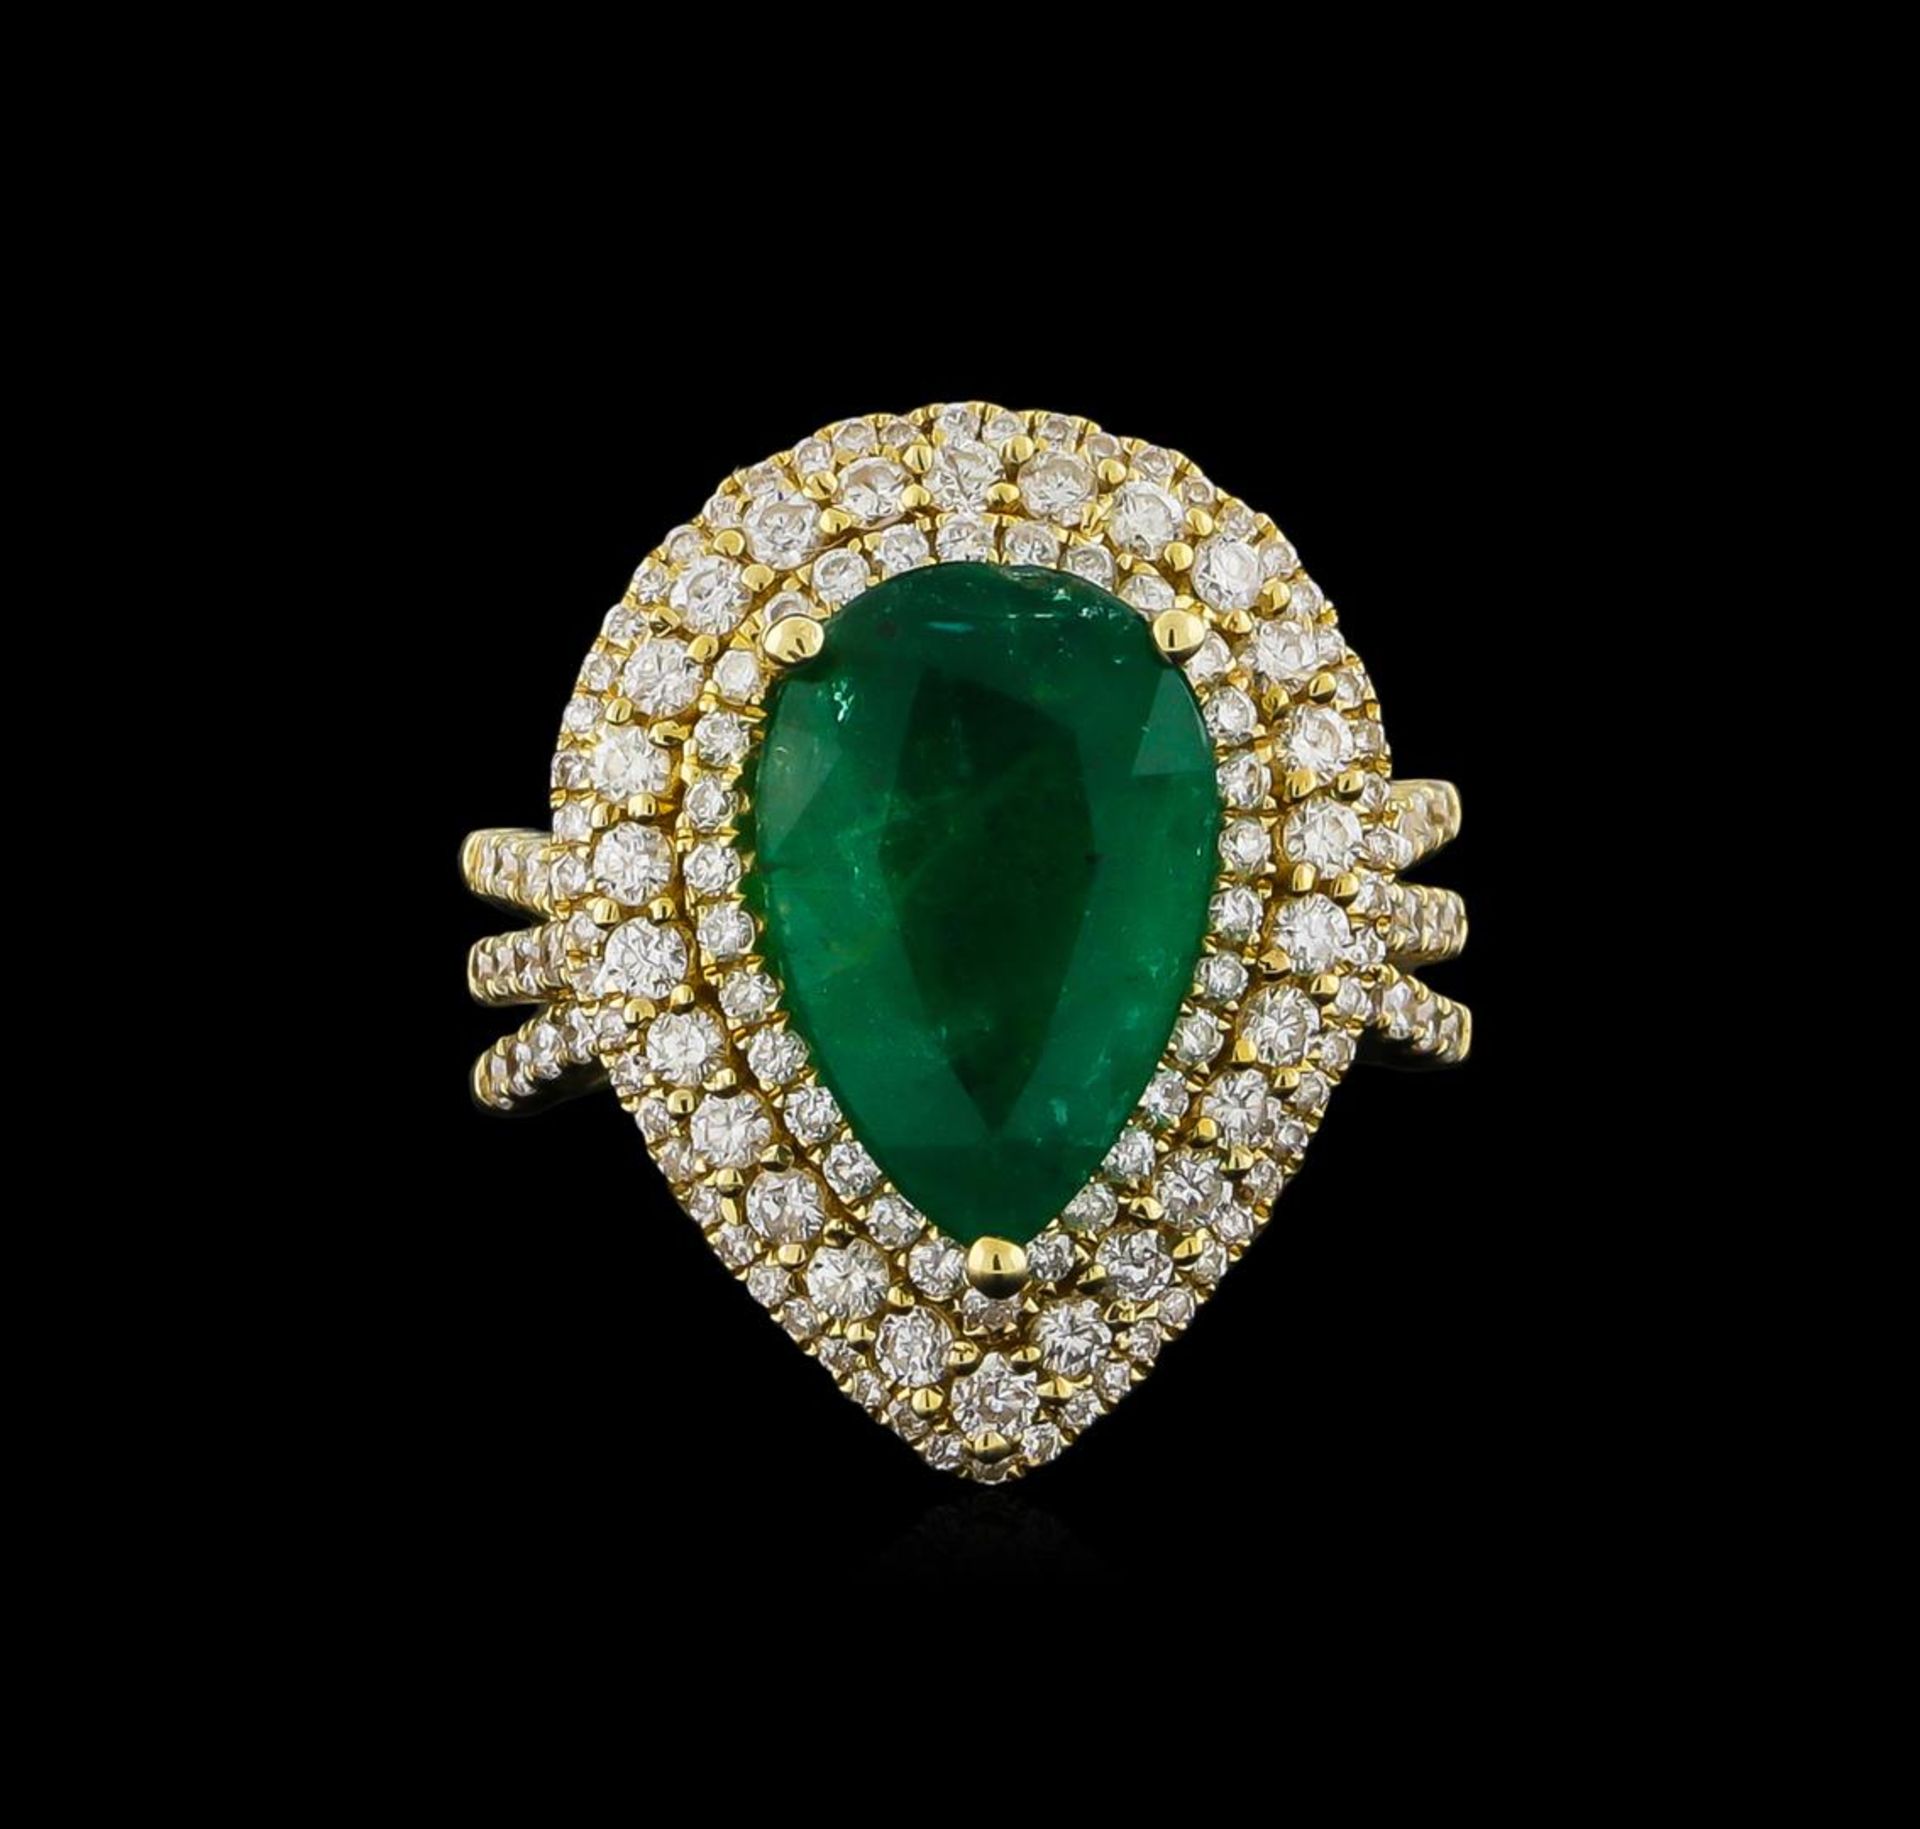 14KT Yellow Gold 4.10 ctw Emerald and Diamond Ring - Image 2 of 5